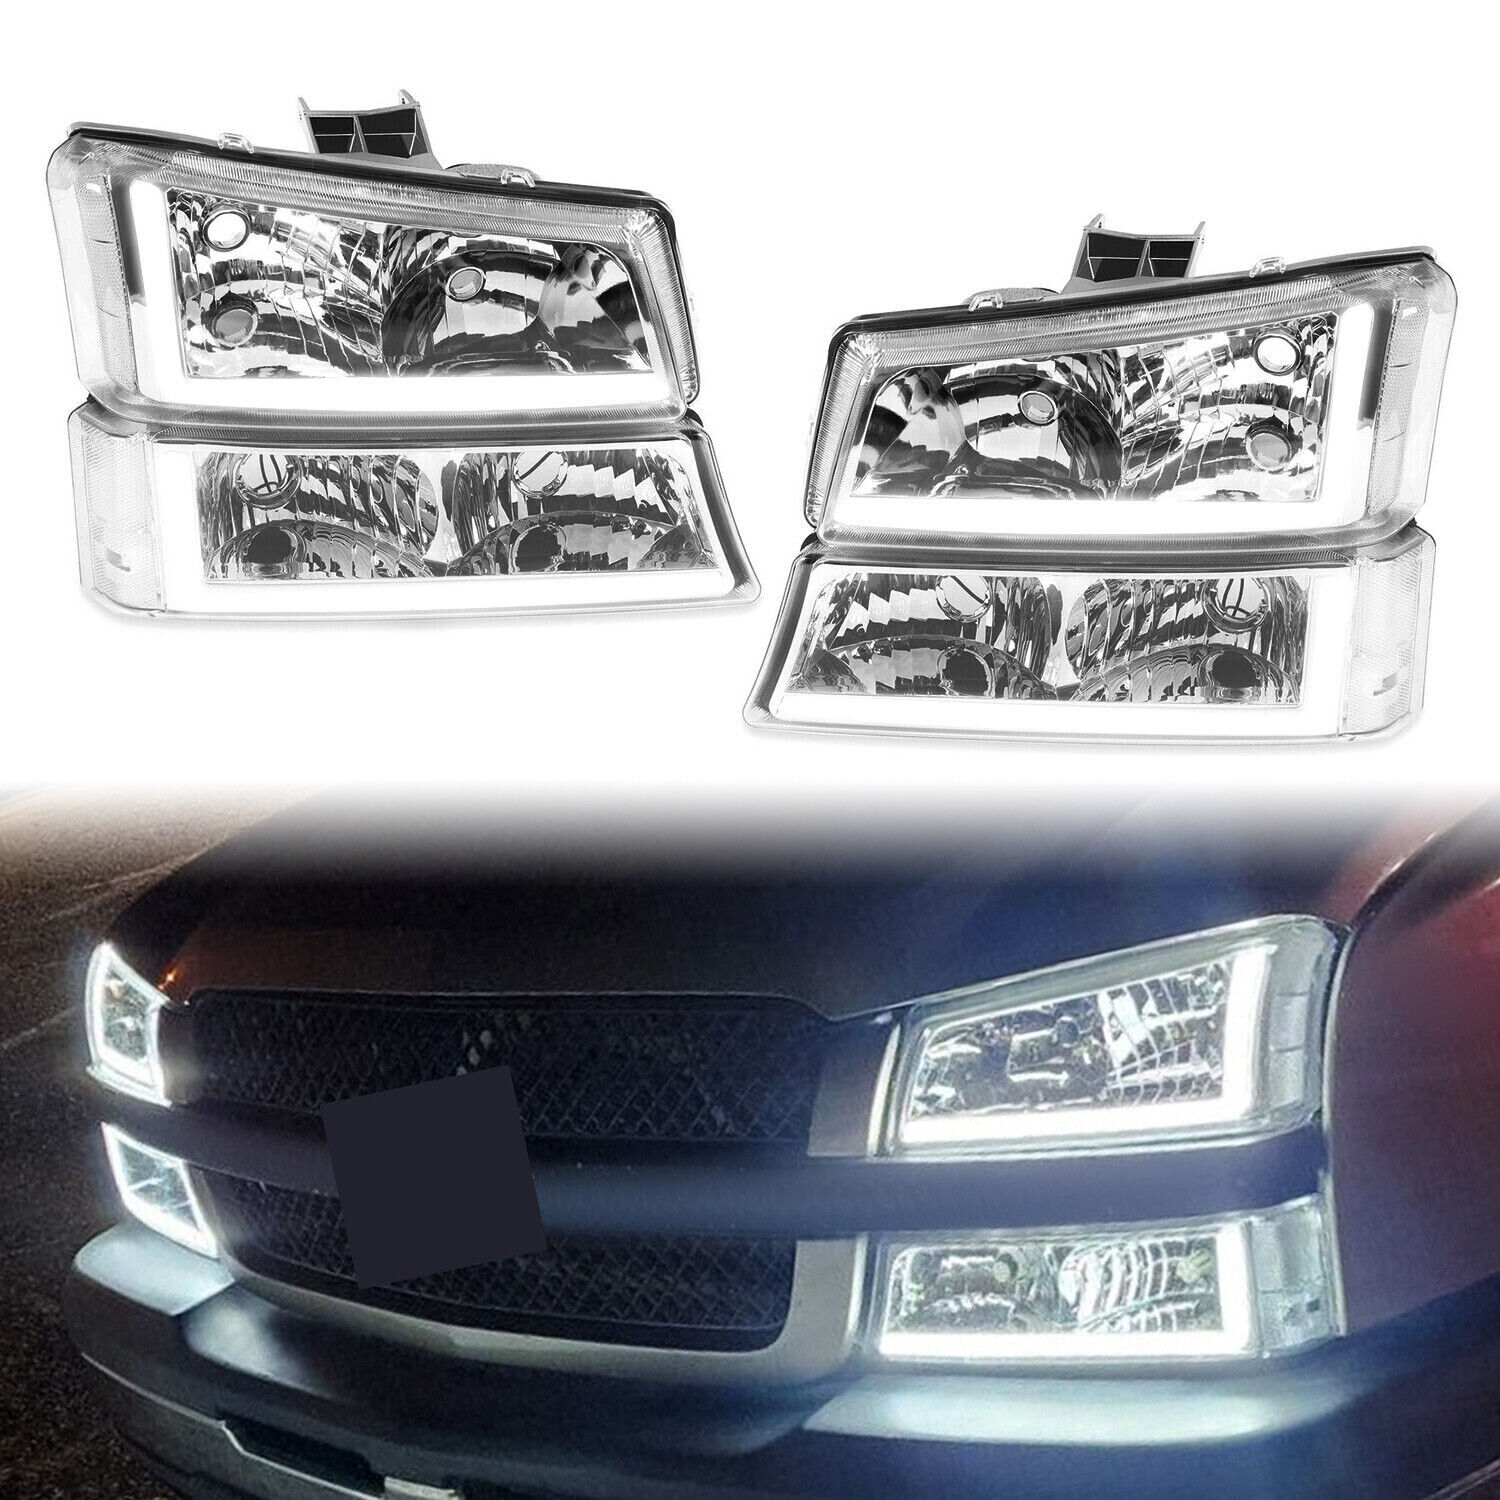 For 2003-2007 Chevy Silverado 1500 2500 3500 LED DRL Headlights+Bumper Lamps